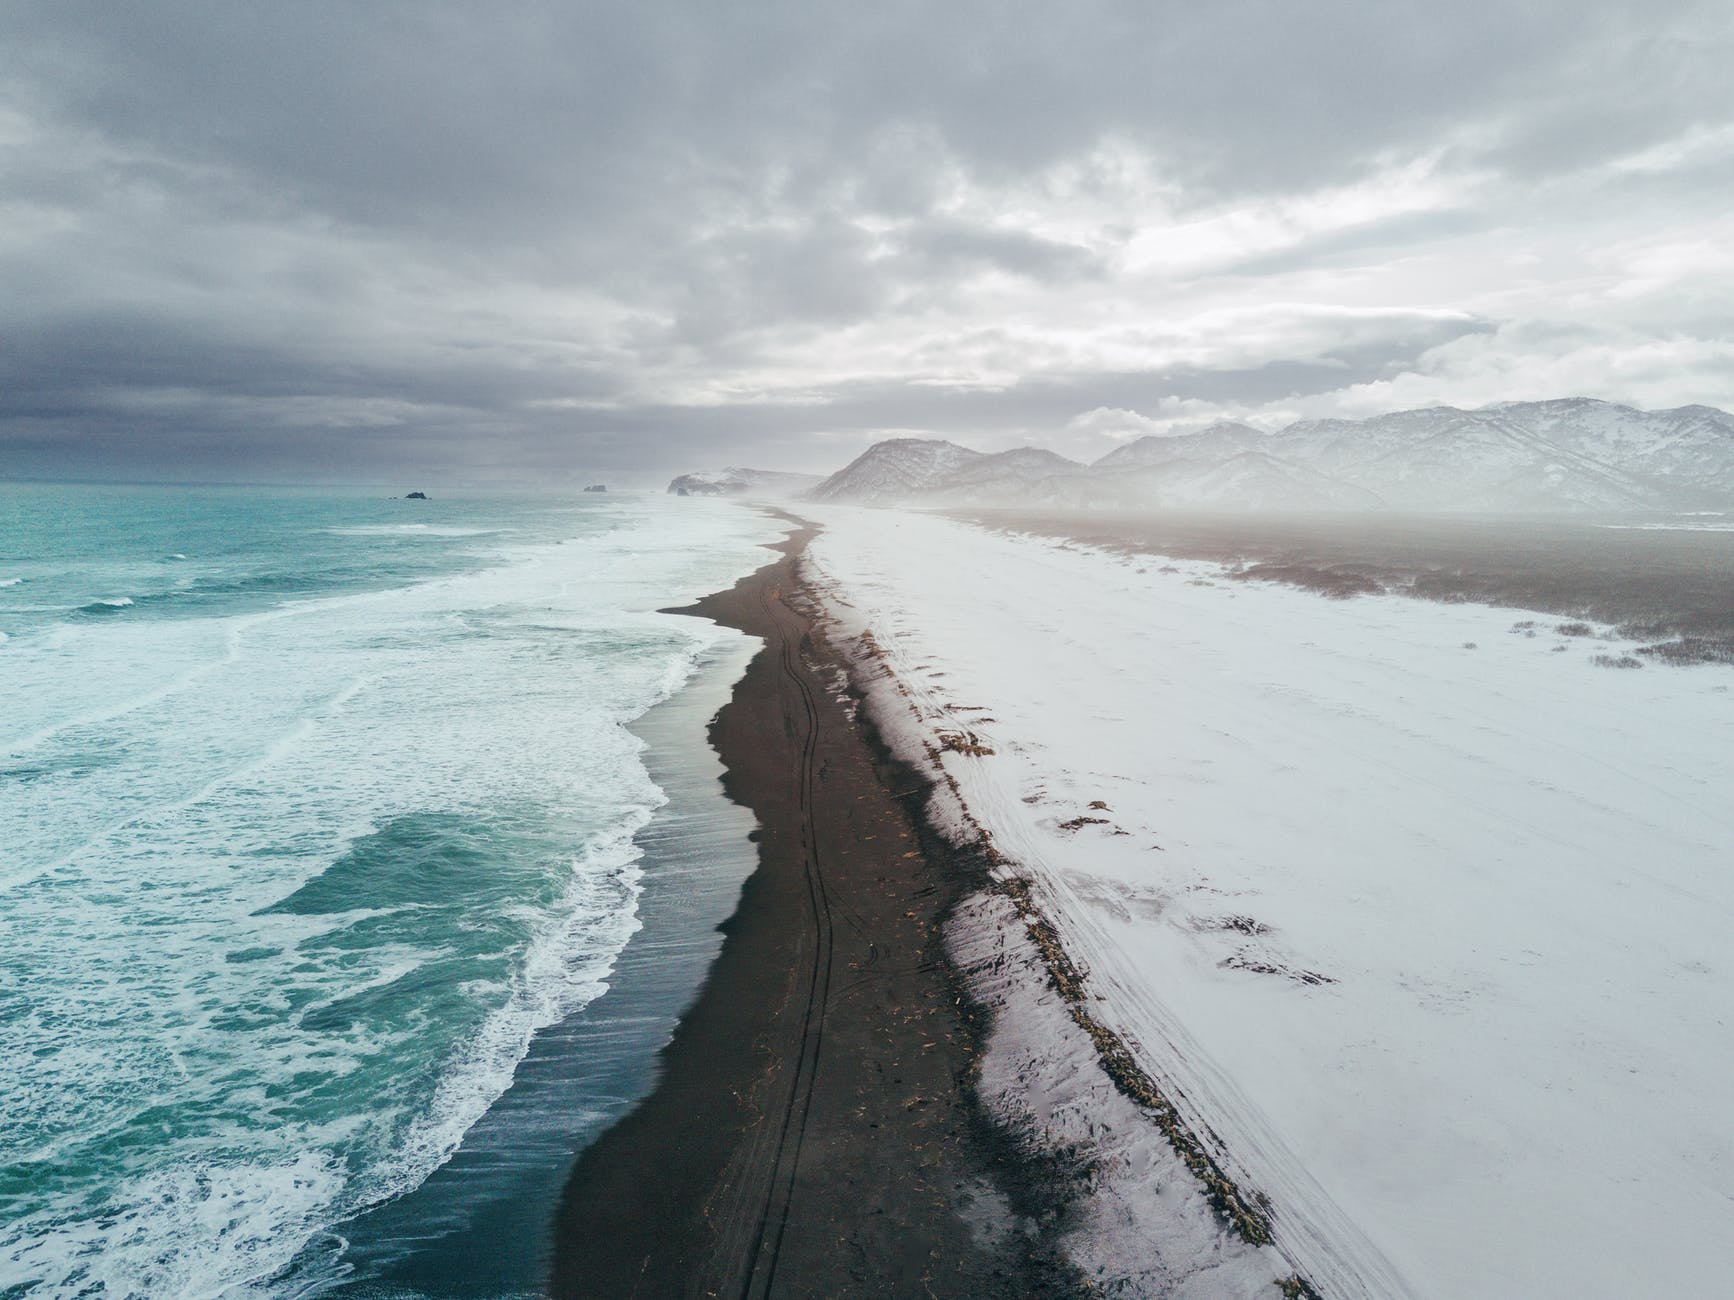 Thin strip of beach with ocean on one side and snow on the other